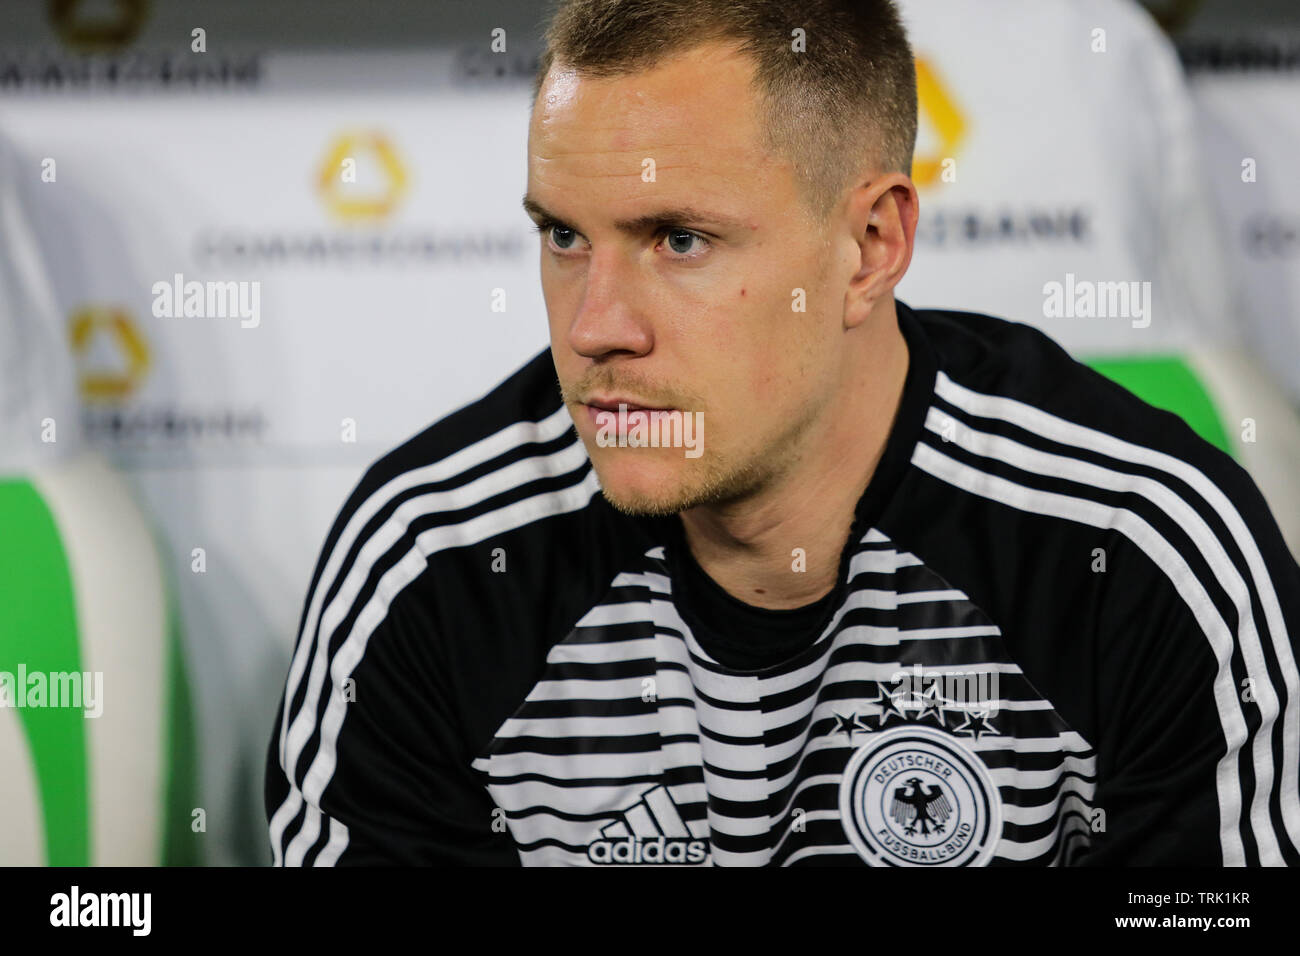 Wolfsburg, Germany, March 20, 2019: Germany national team goalkeeper, Marc-Andre ter Stegen, sitting on the bench during Germany vs Serbia. Stock Photo